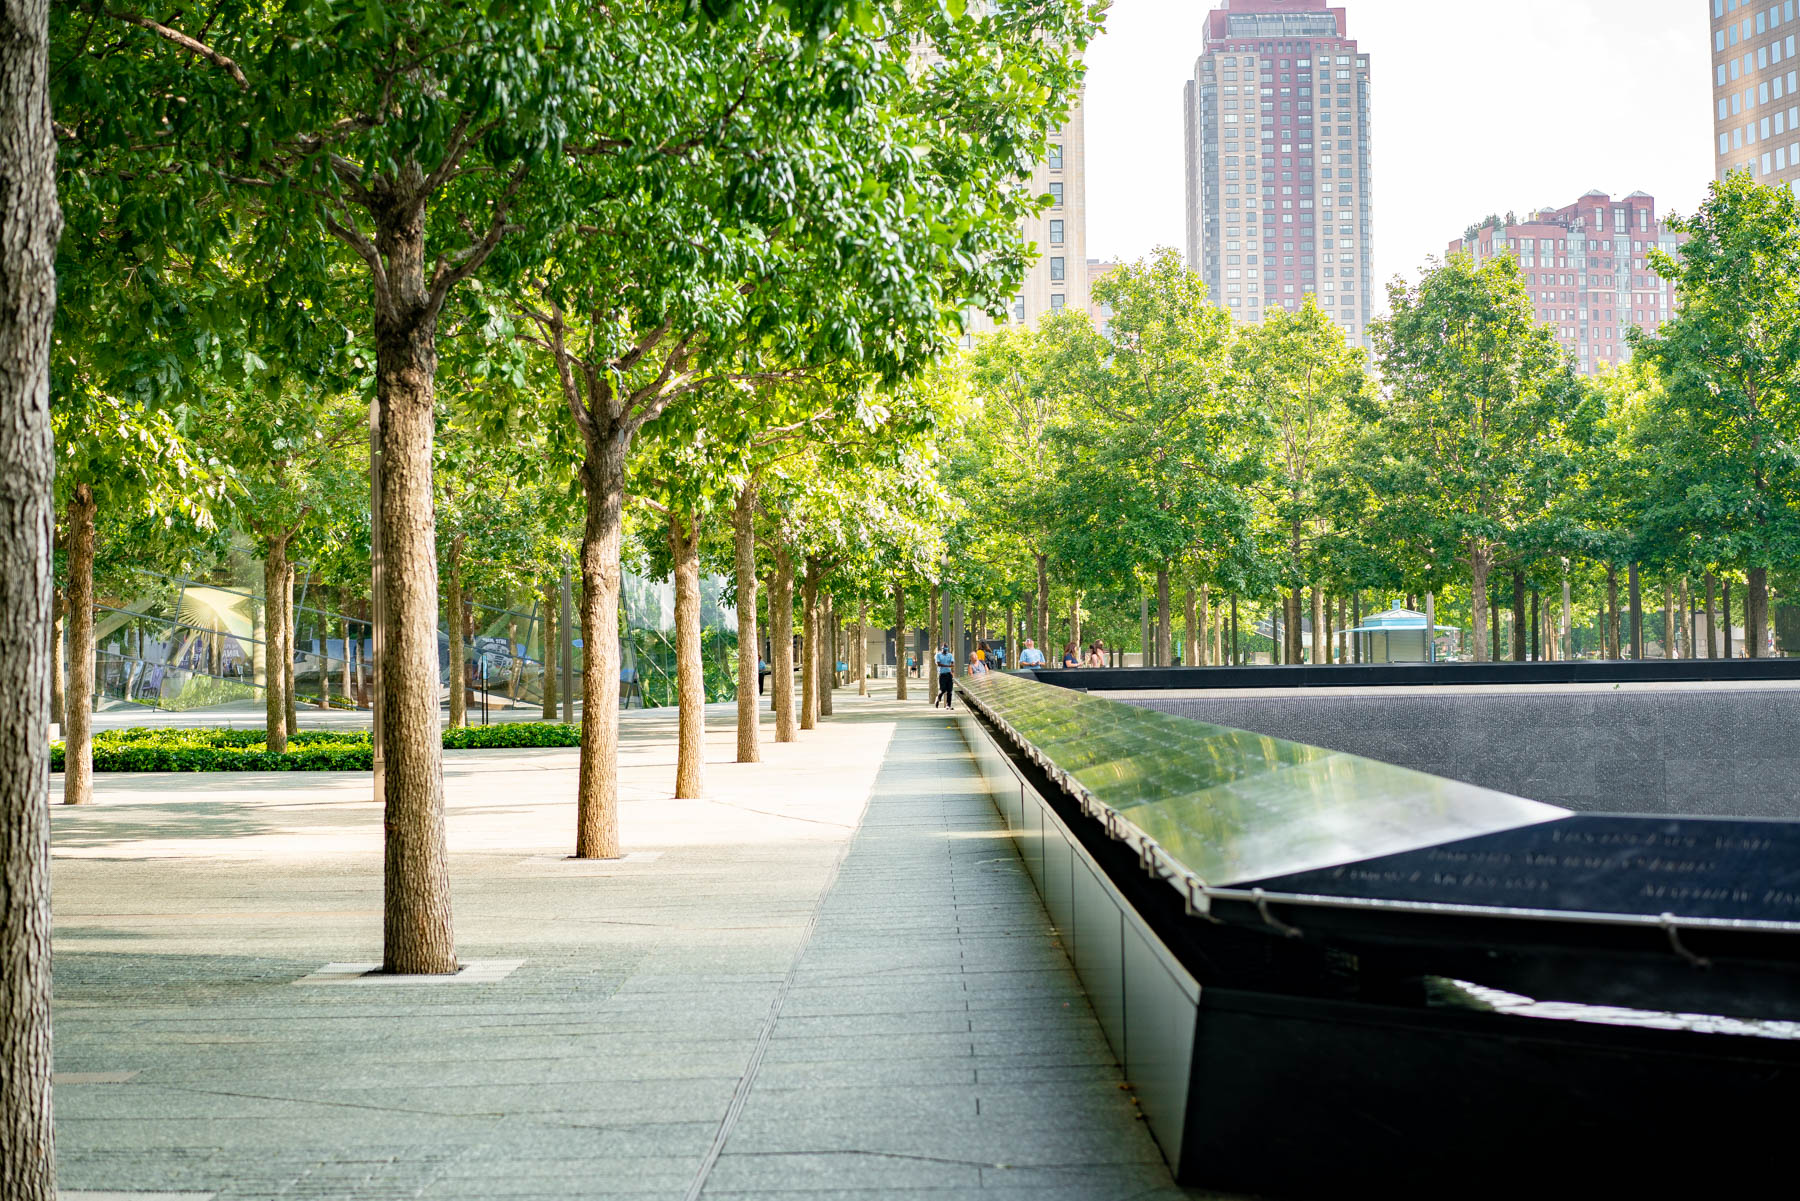 9/11 memorial nyc, historic sites in New York